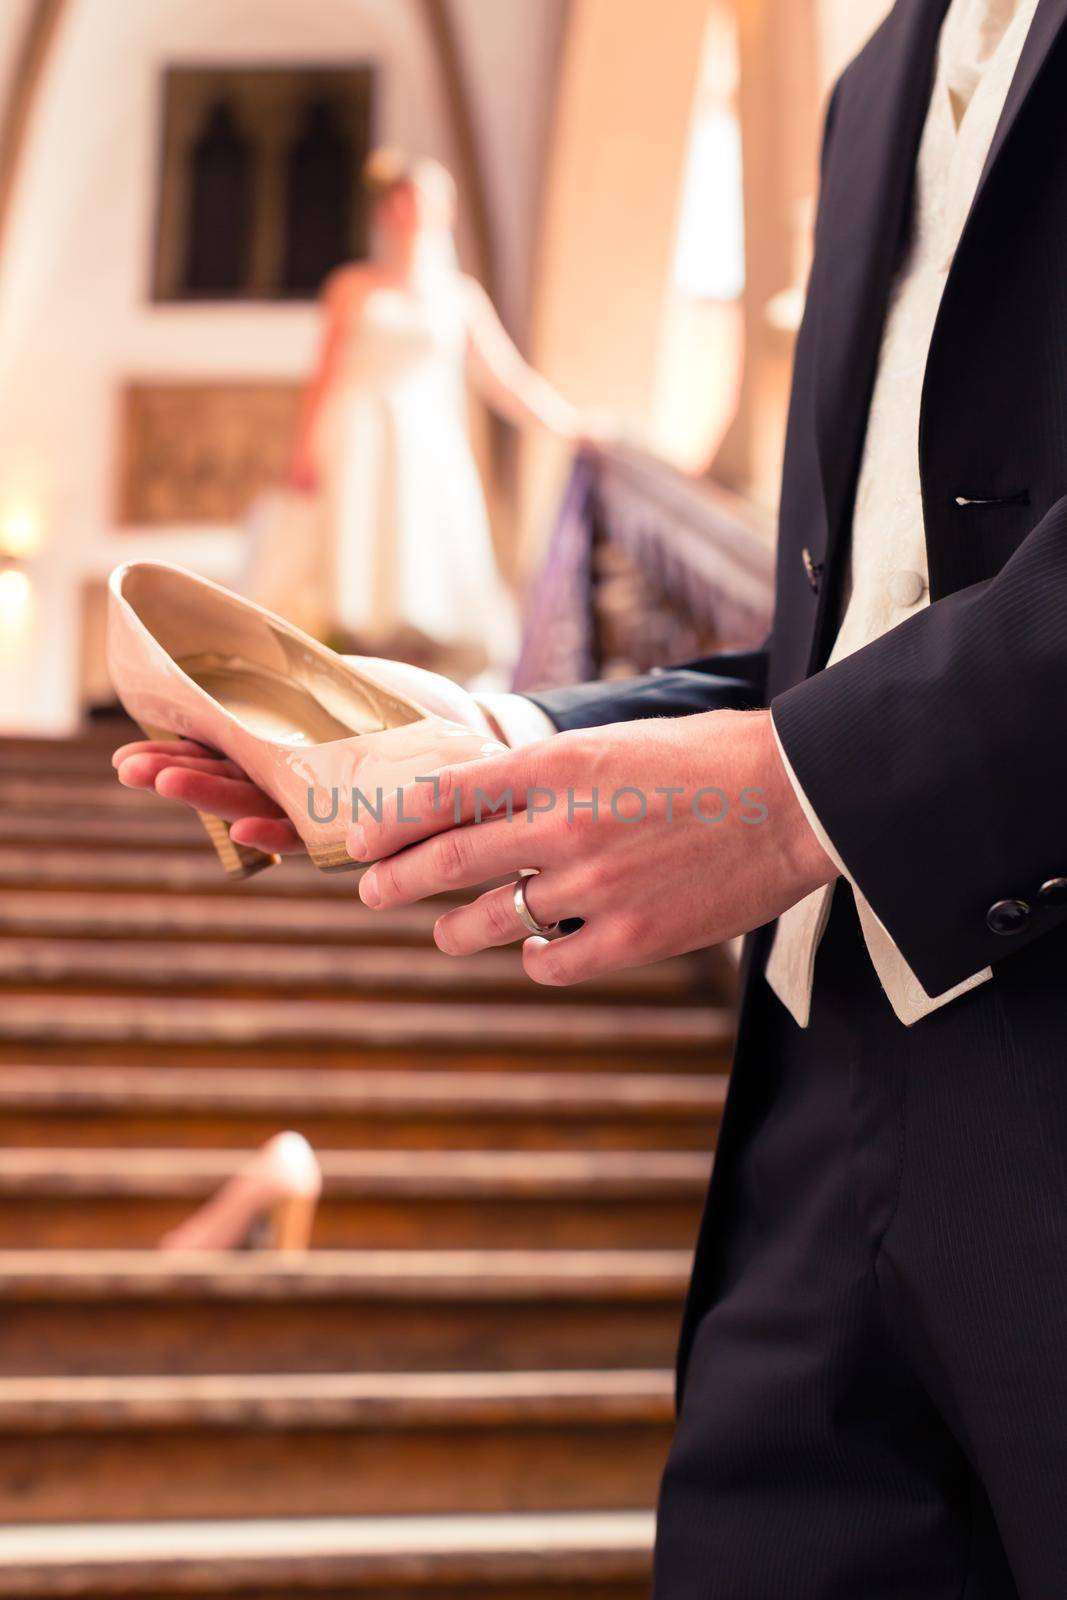 Close-up of bridegroom's hand holding bride's wedding shoe in front of staircase